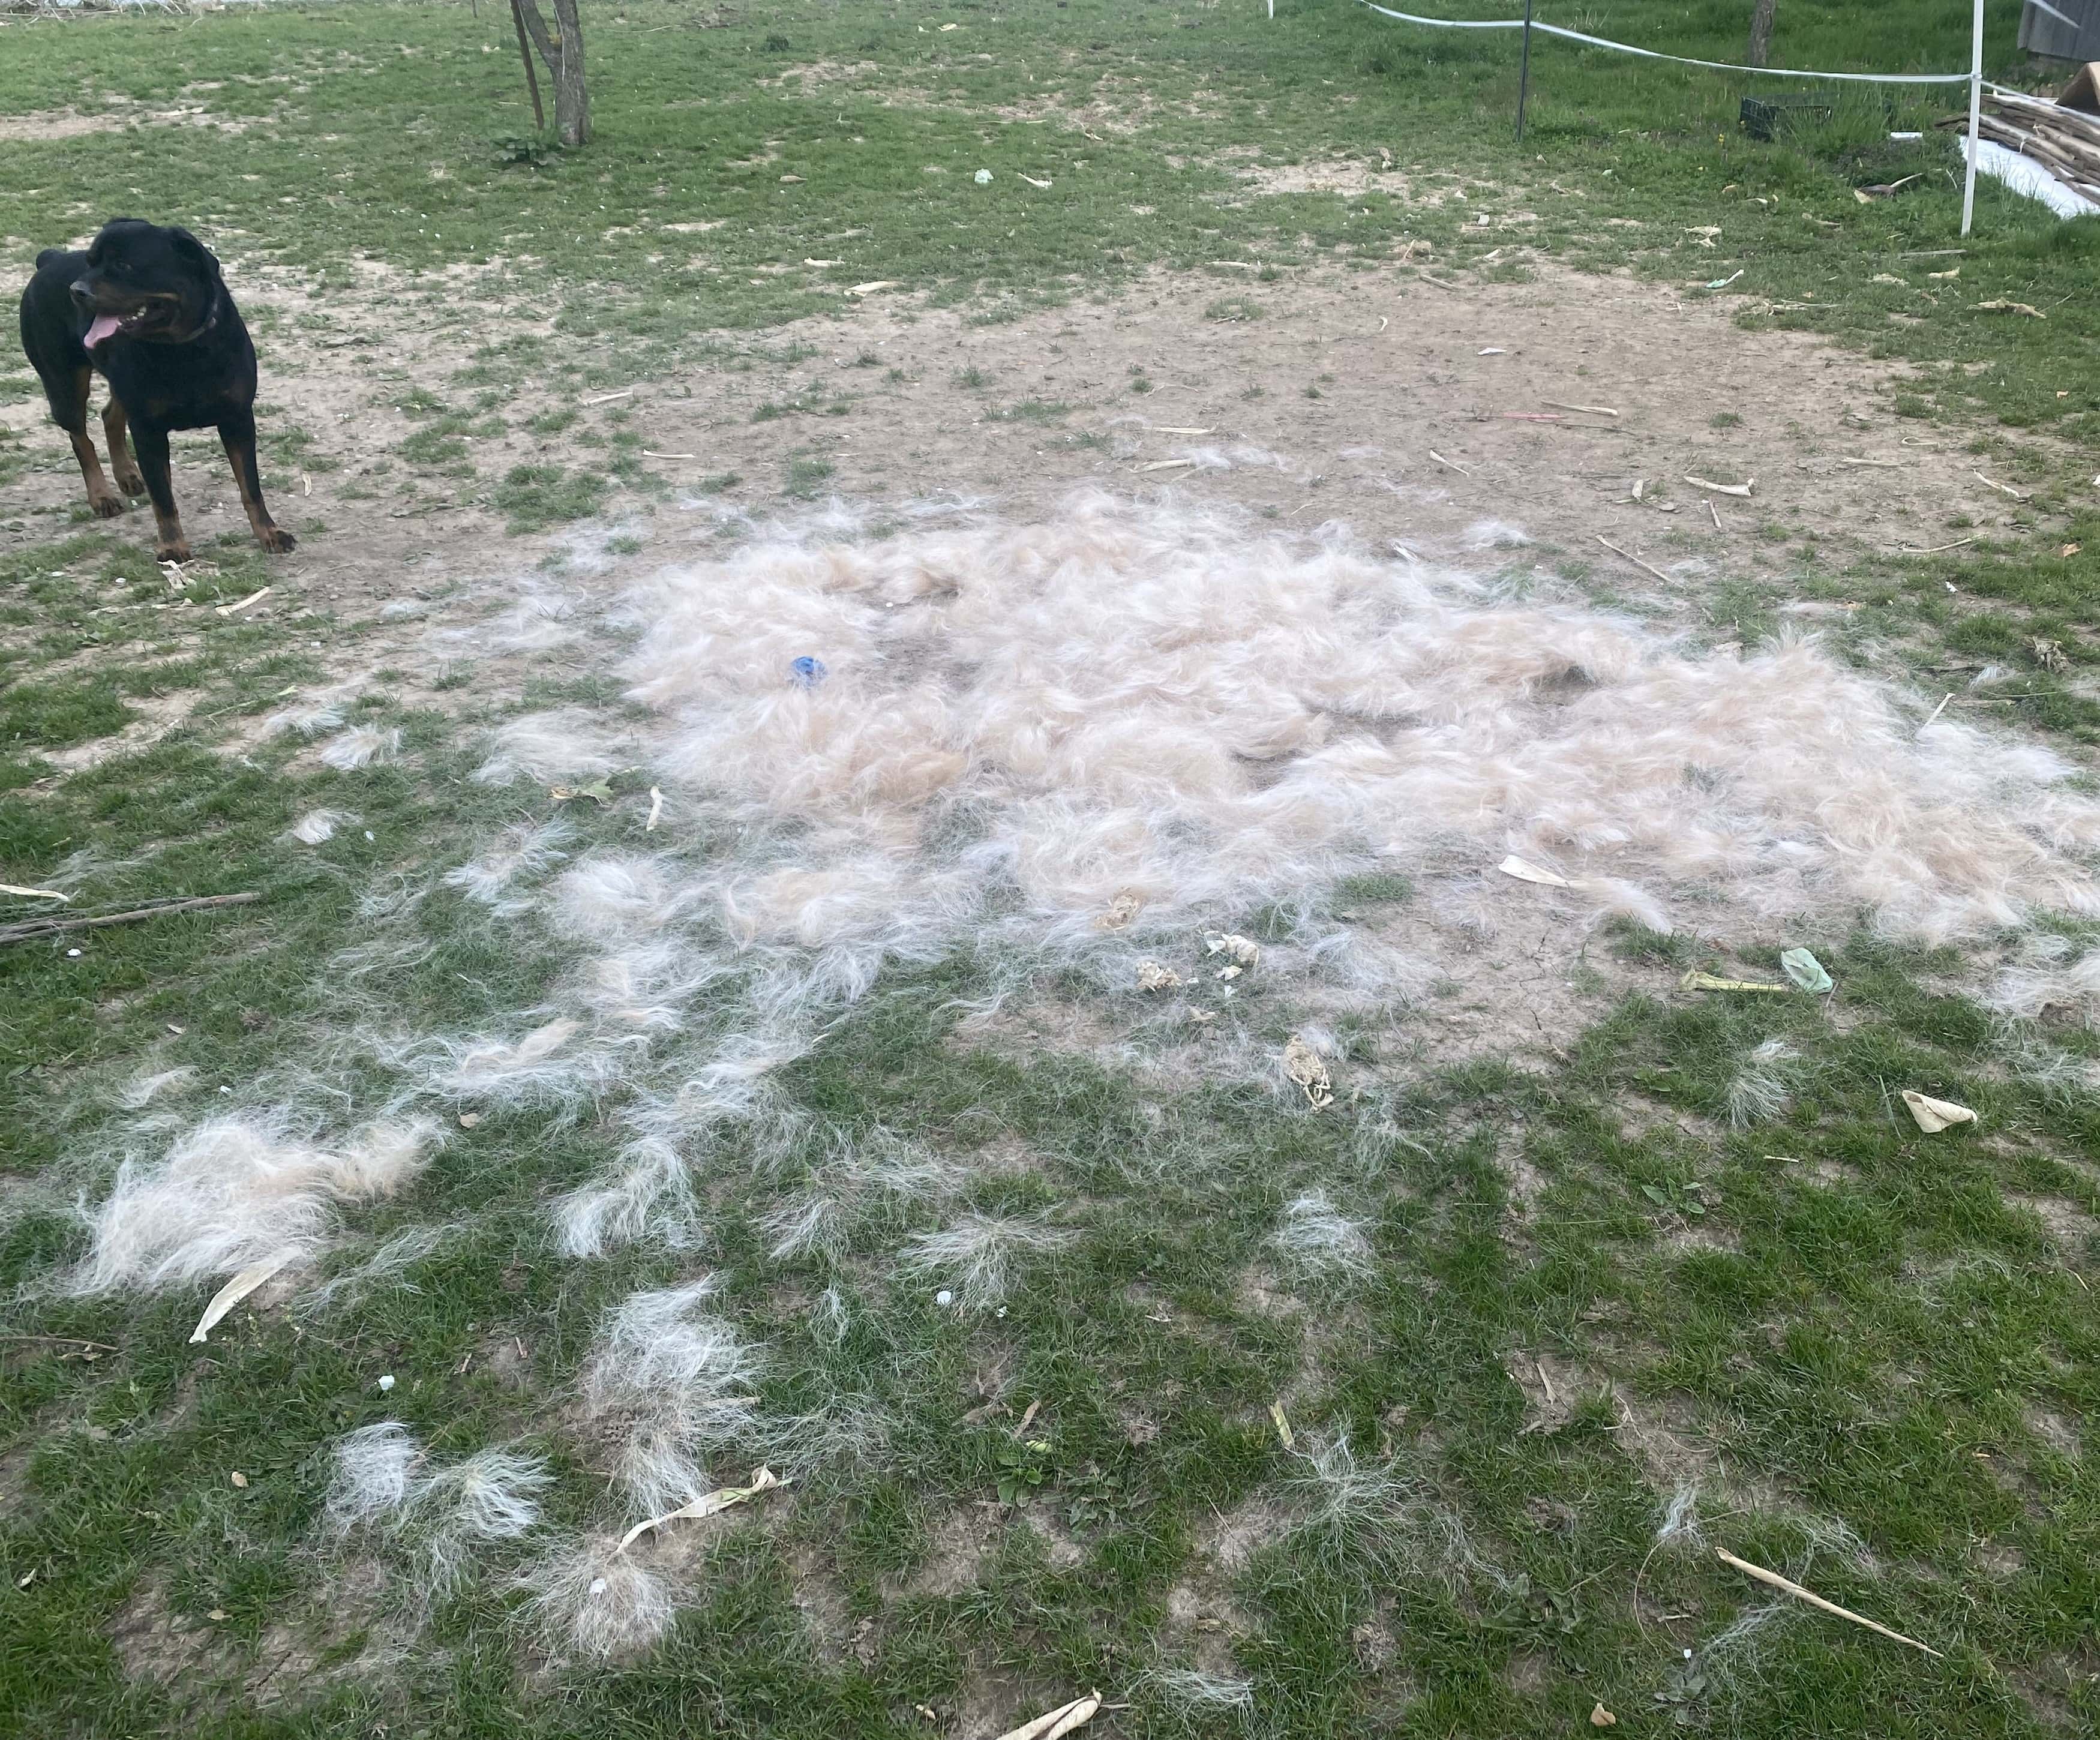 rottweiler standing next to a large pile of white horse hair on the ground